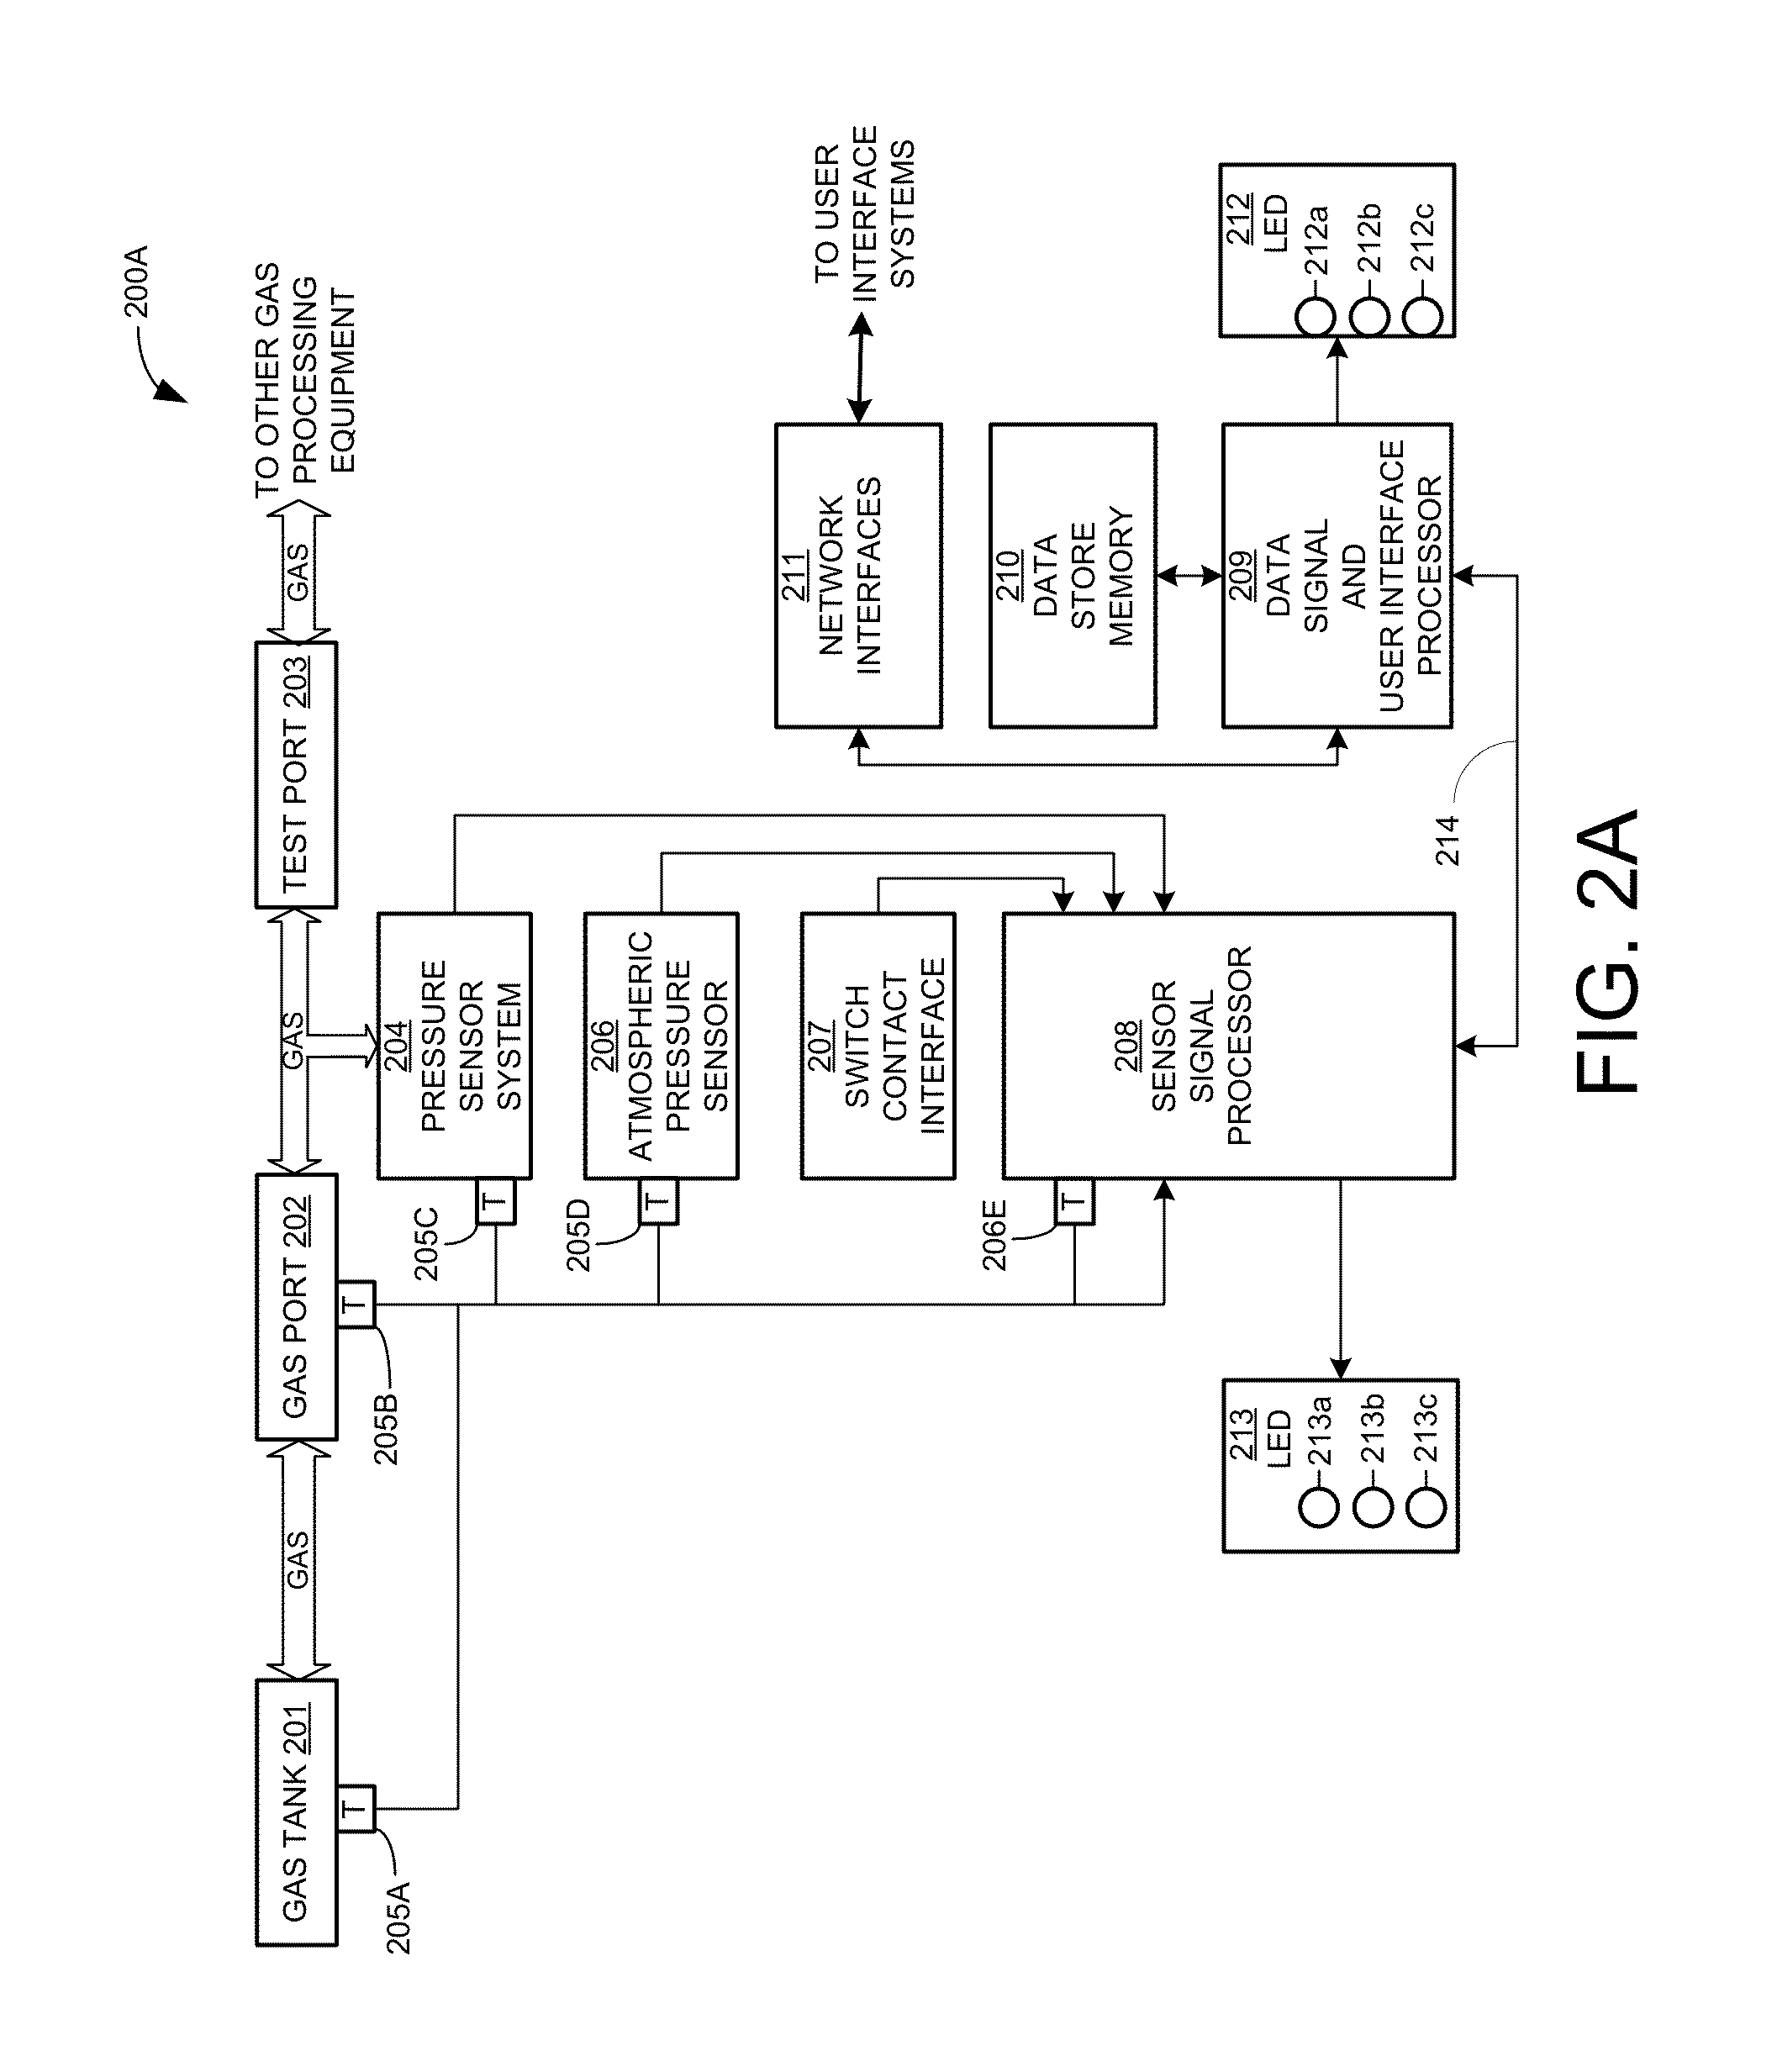 Gas insulated switchgear monitoring apparatus and method